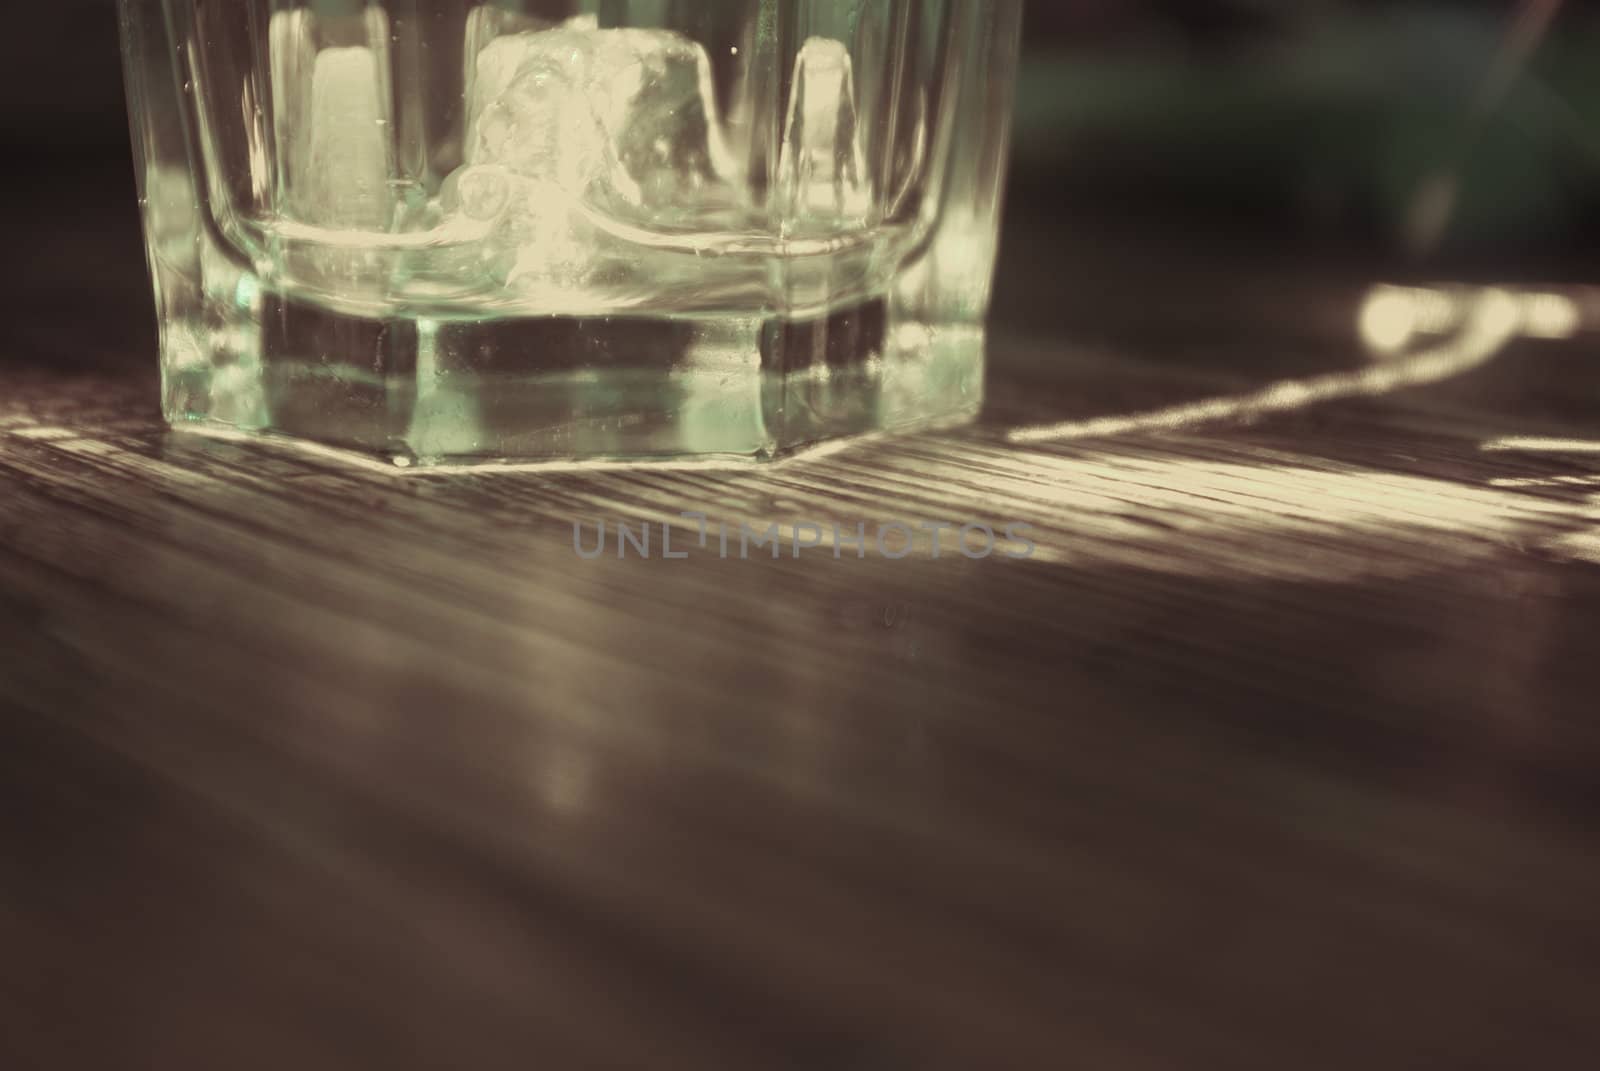 It is a rock glass on the table